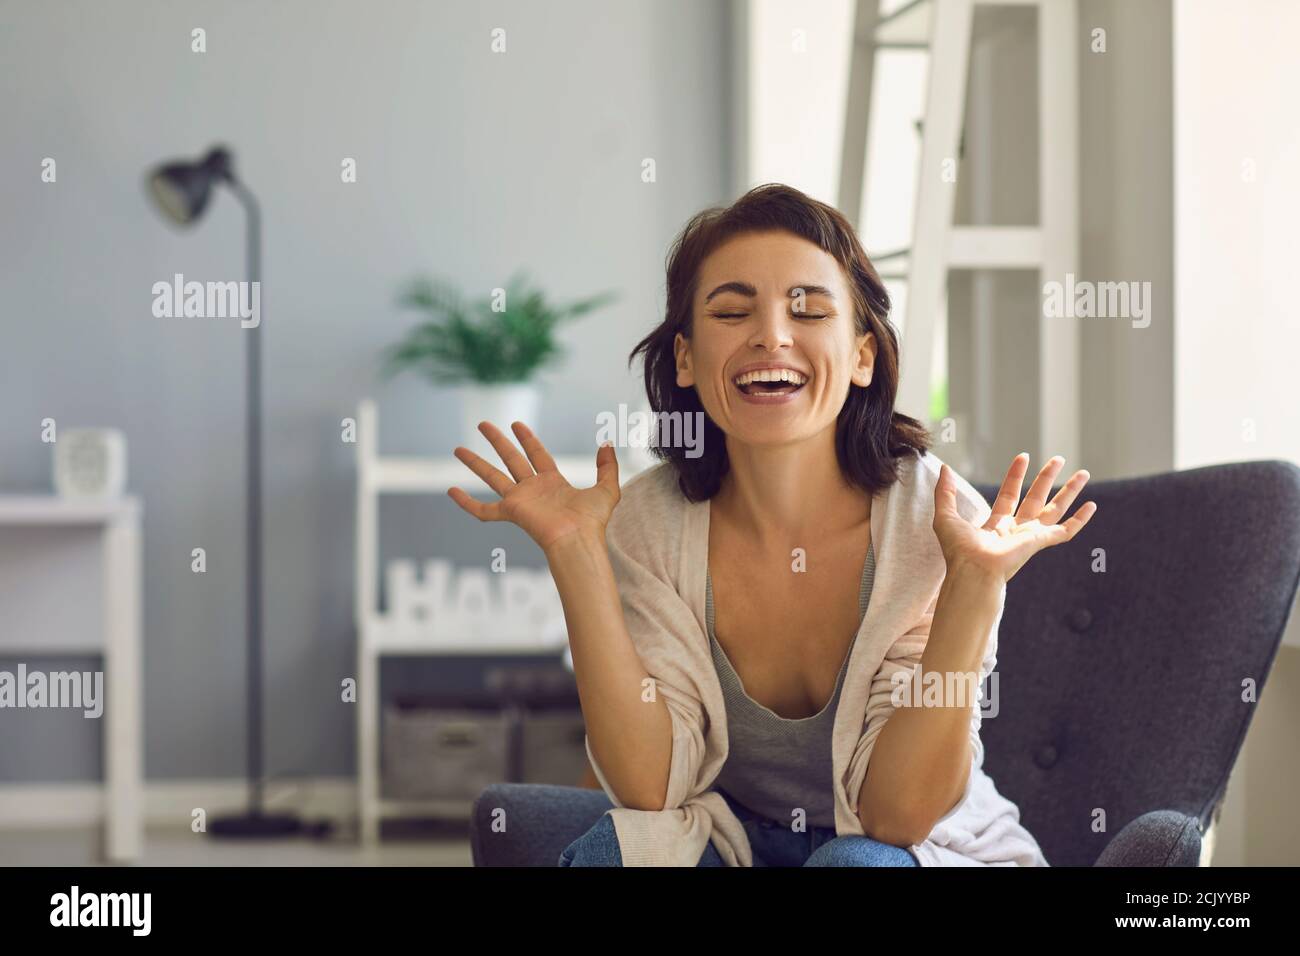 Young smiling woman expressing happiness during online meeting or teleconference from home Stock Photo